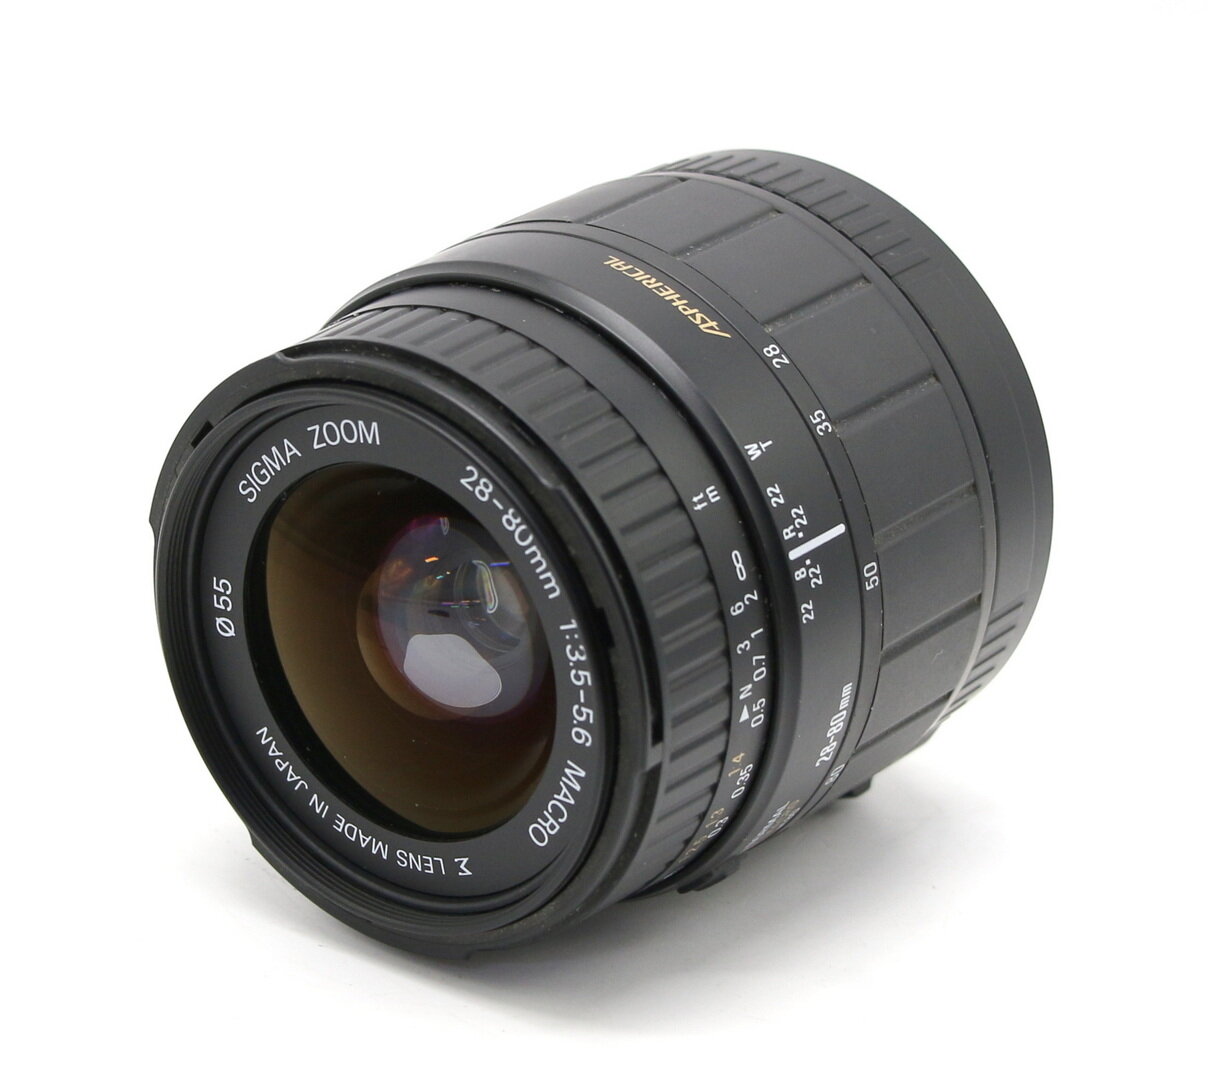 Sigma AF Zoom 28-80mm f/3.5-5.6 Macro Aspherical for Canon (Japan, 1996)